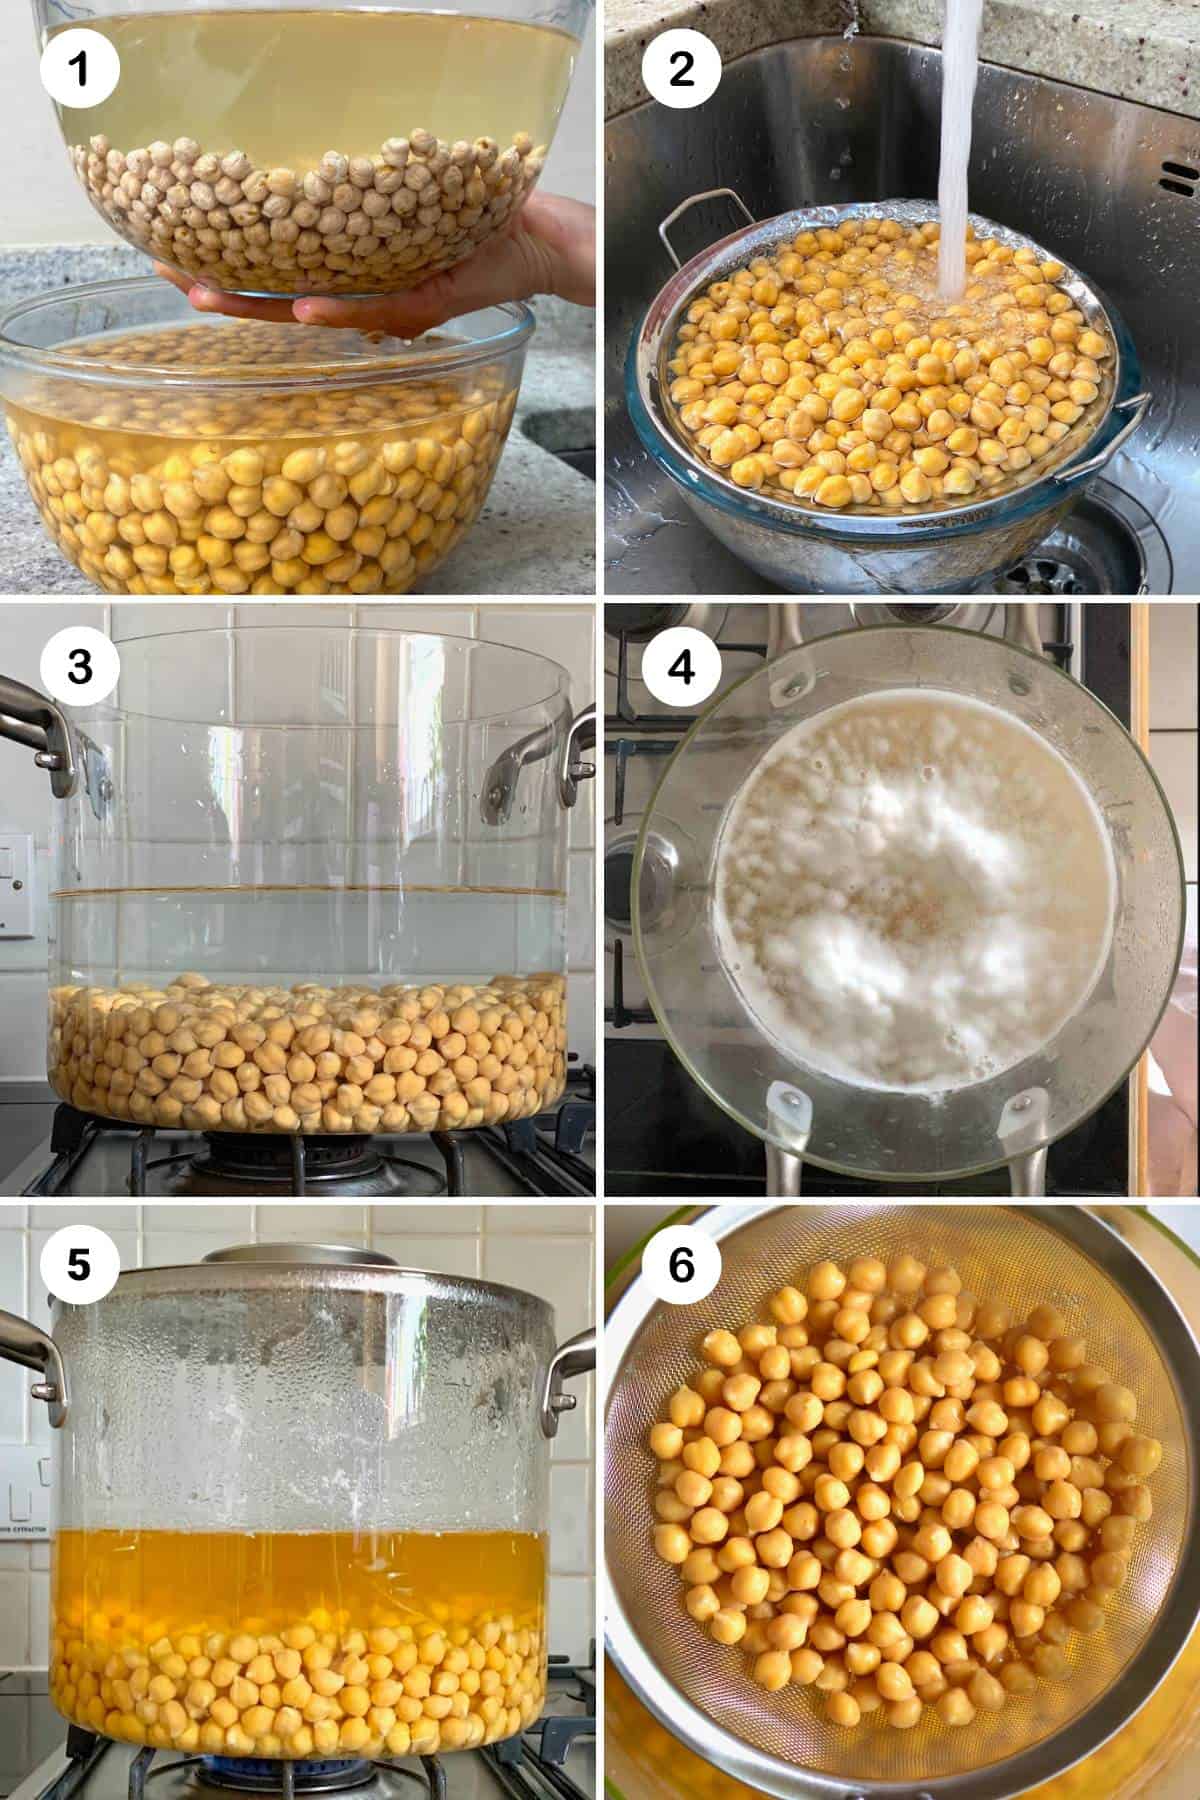 Steps for how to soak, and cook chickpeas